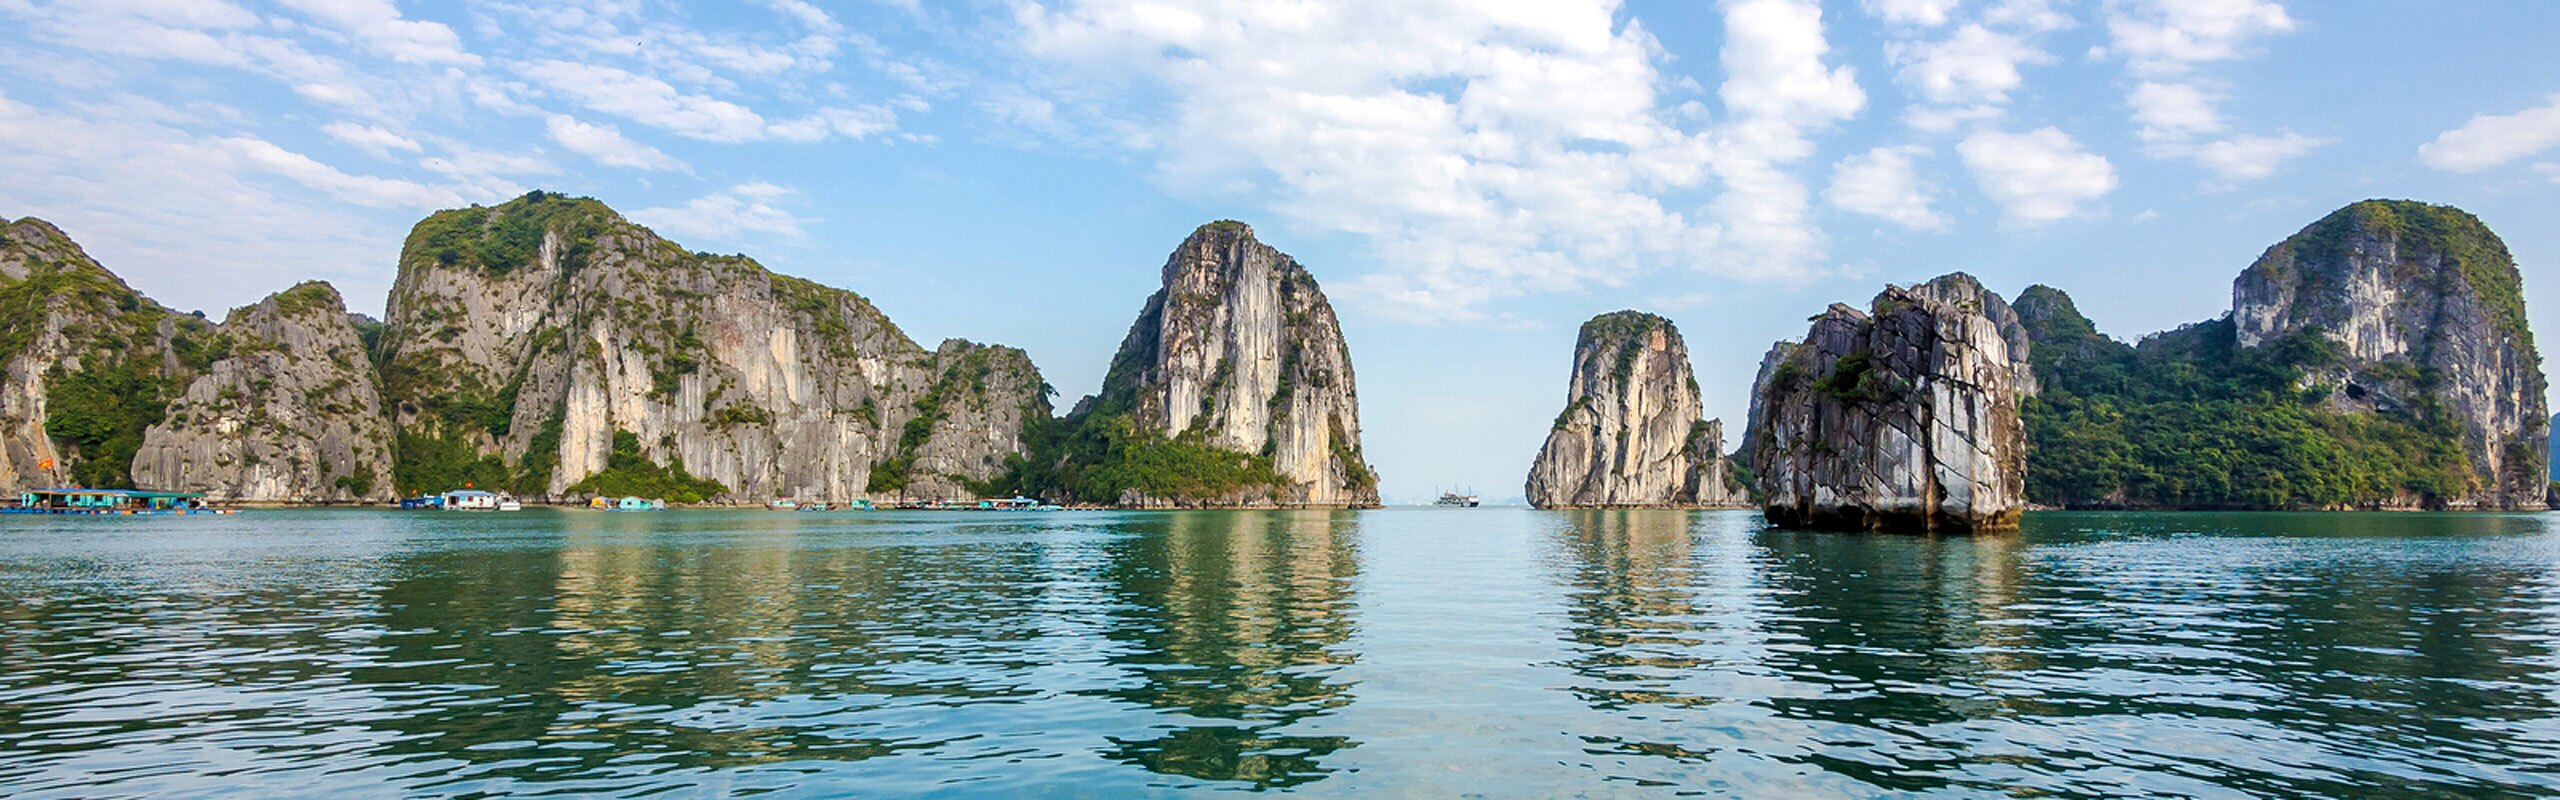 15-Day Vietnam Family Holiday Tour